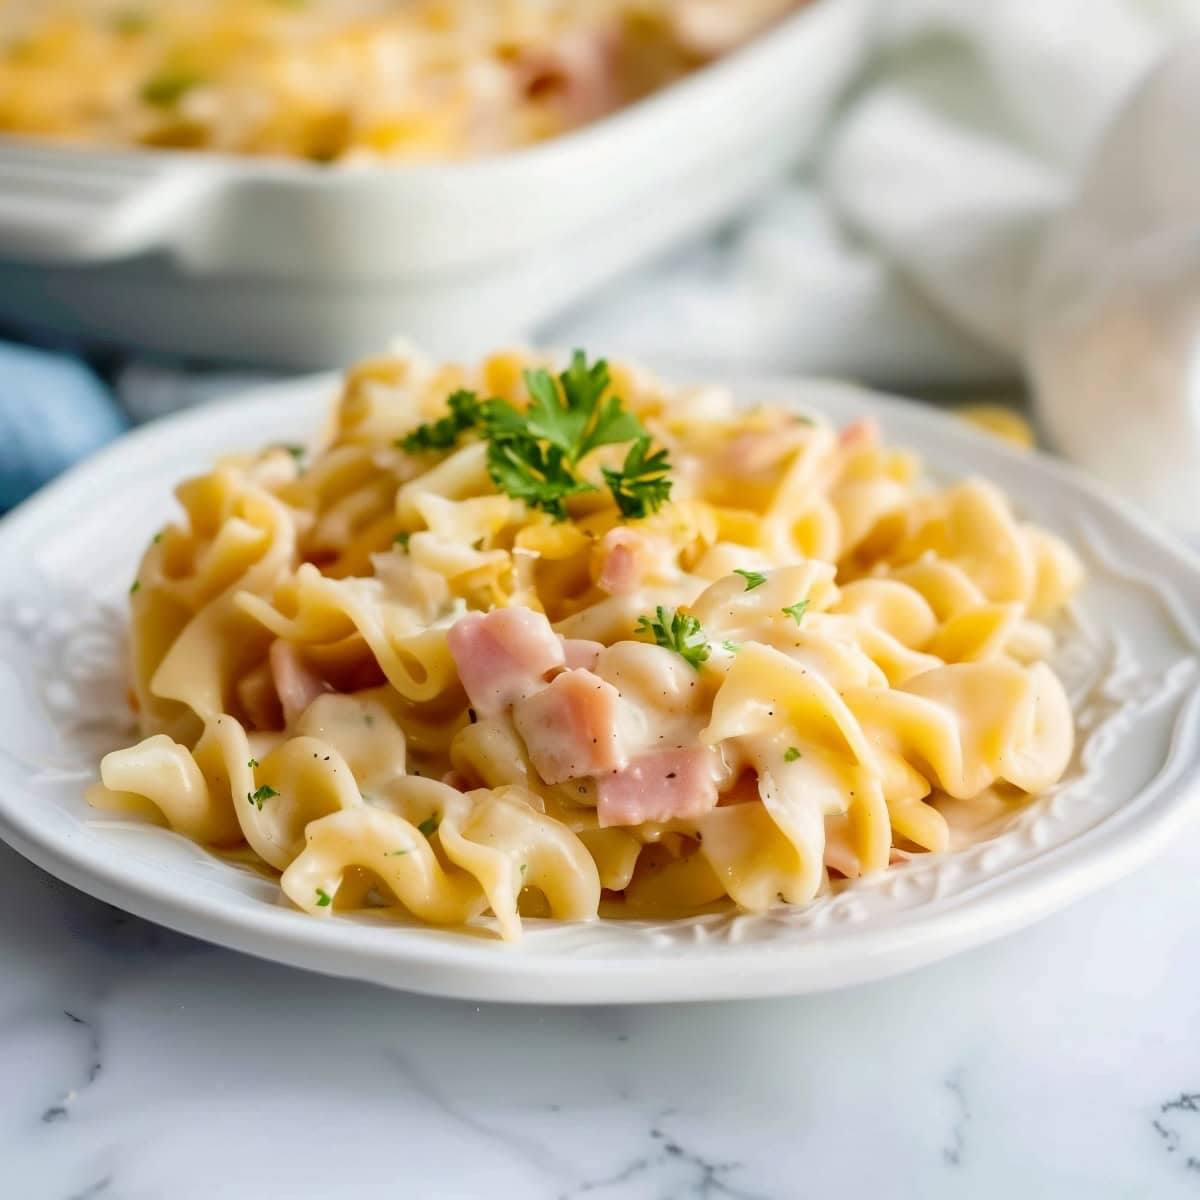 Cheesy ham and egg noodles in an elegant plate.